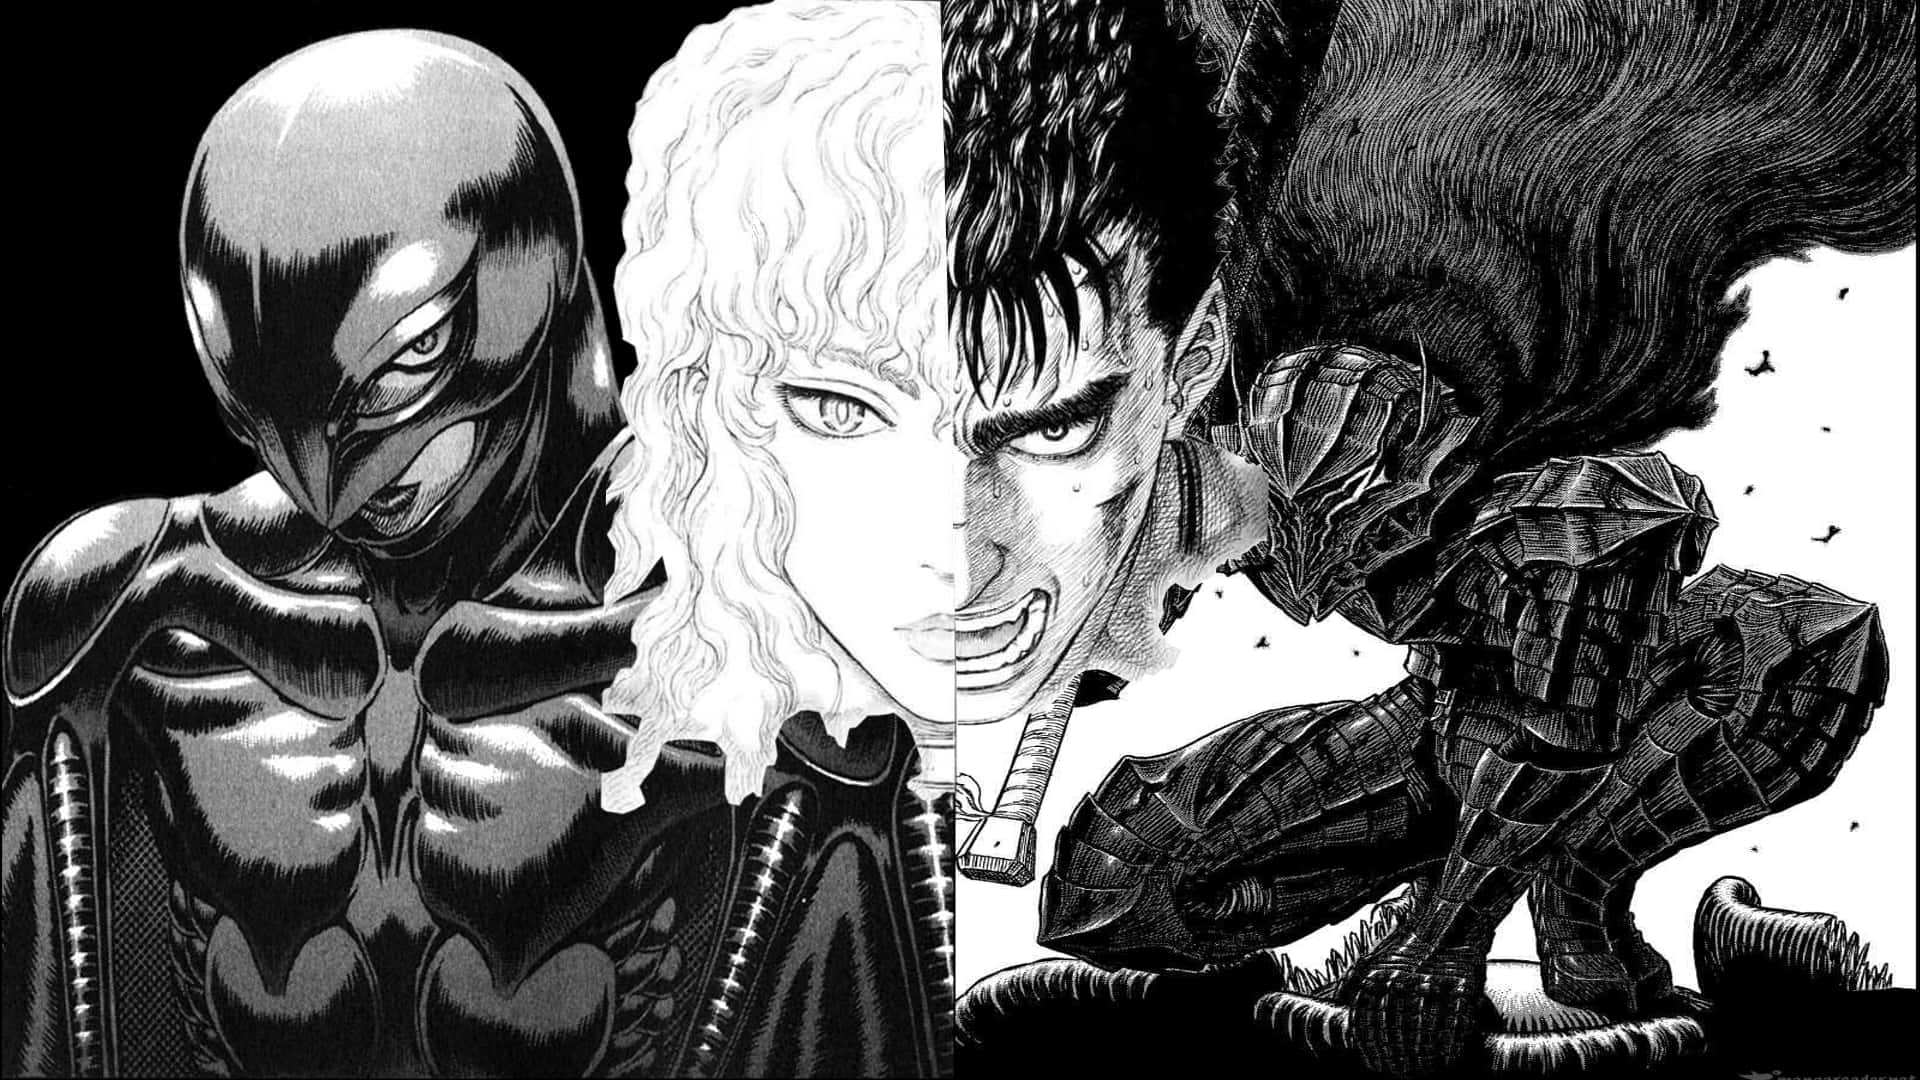 A close-up look at the artwork of the iconic Berserk manga Wallpaper